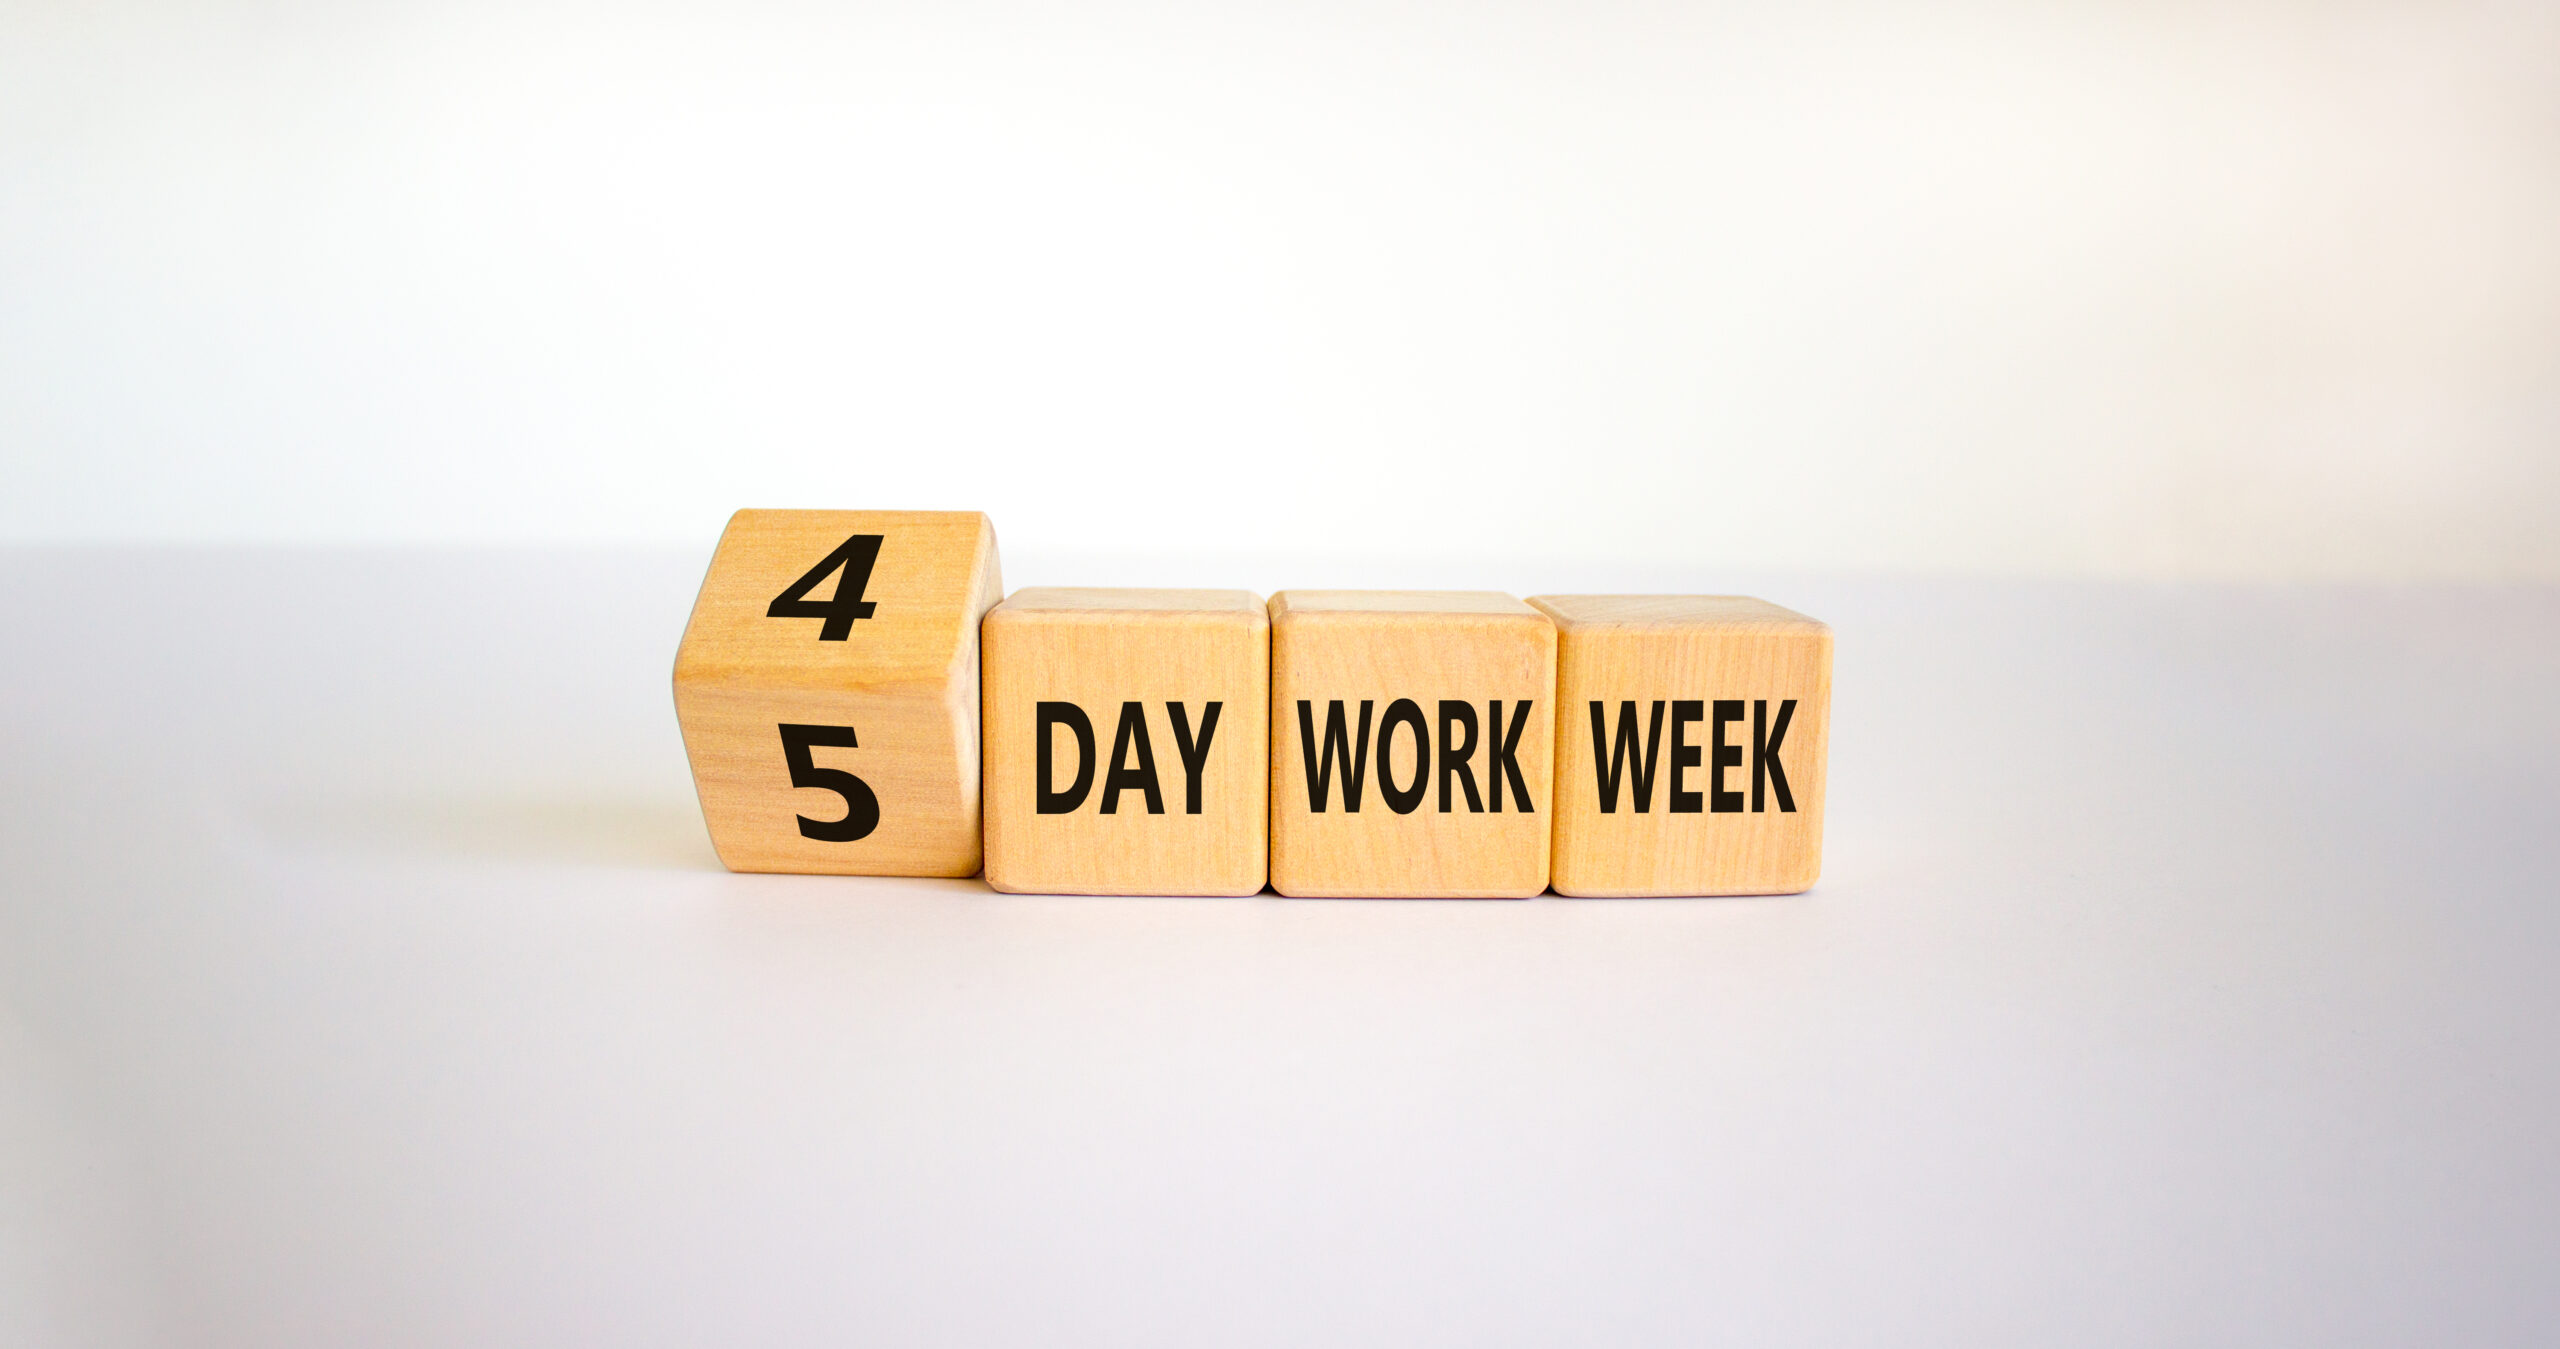 88% of people working in financial services would opt-in for a four-day week